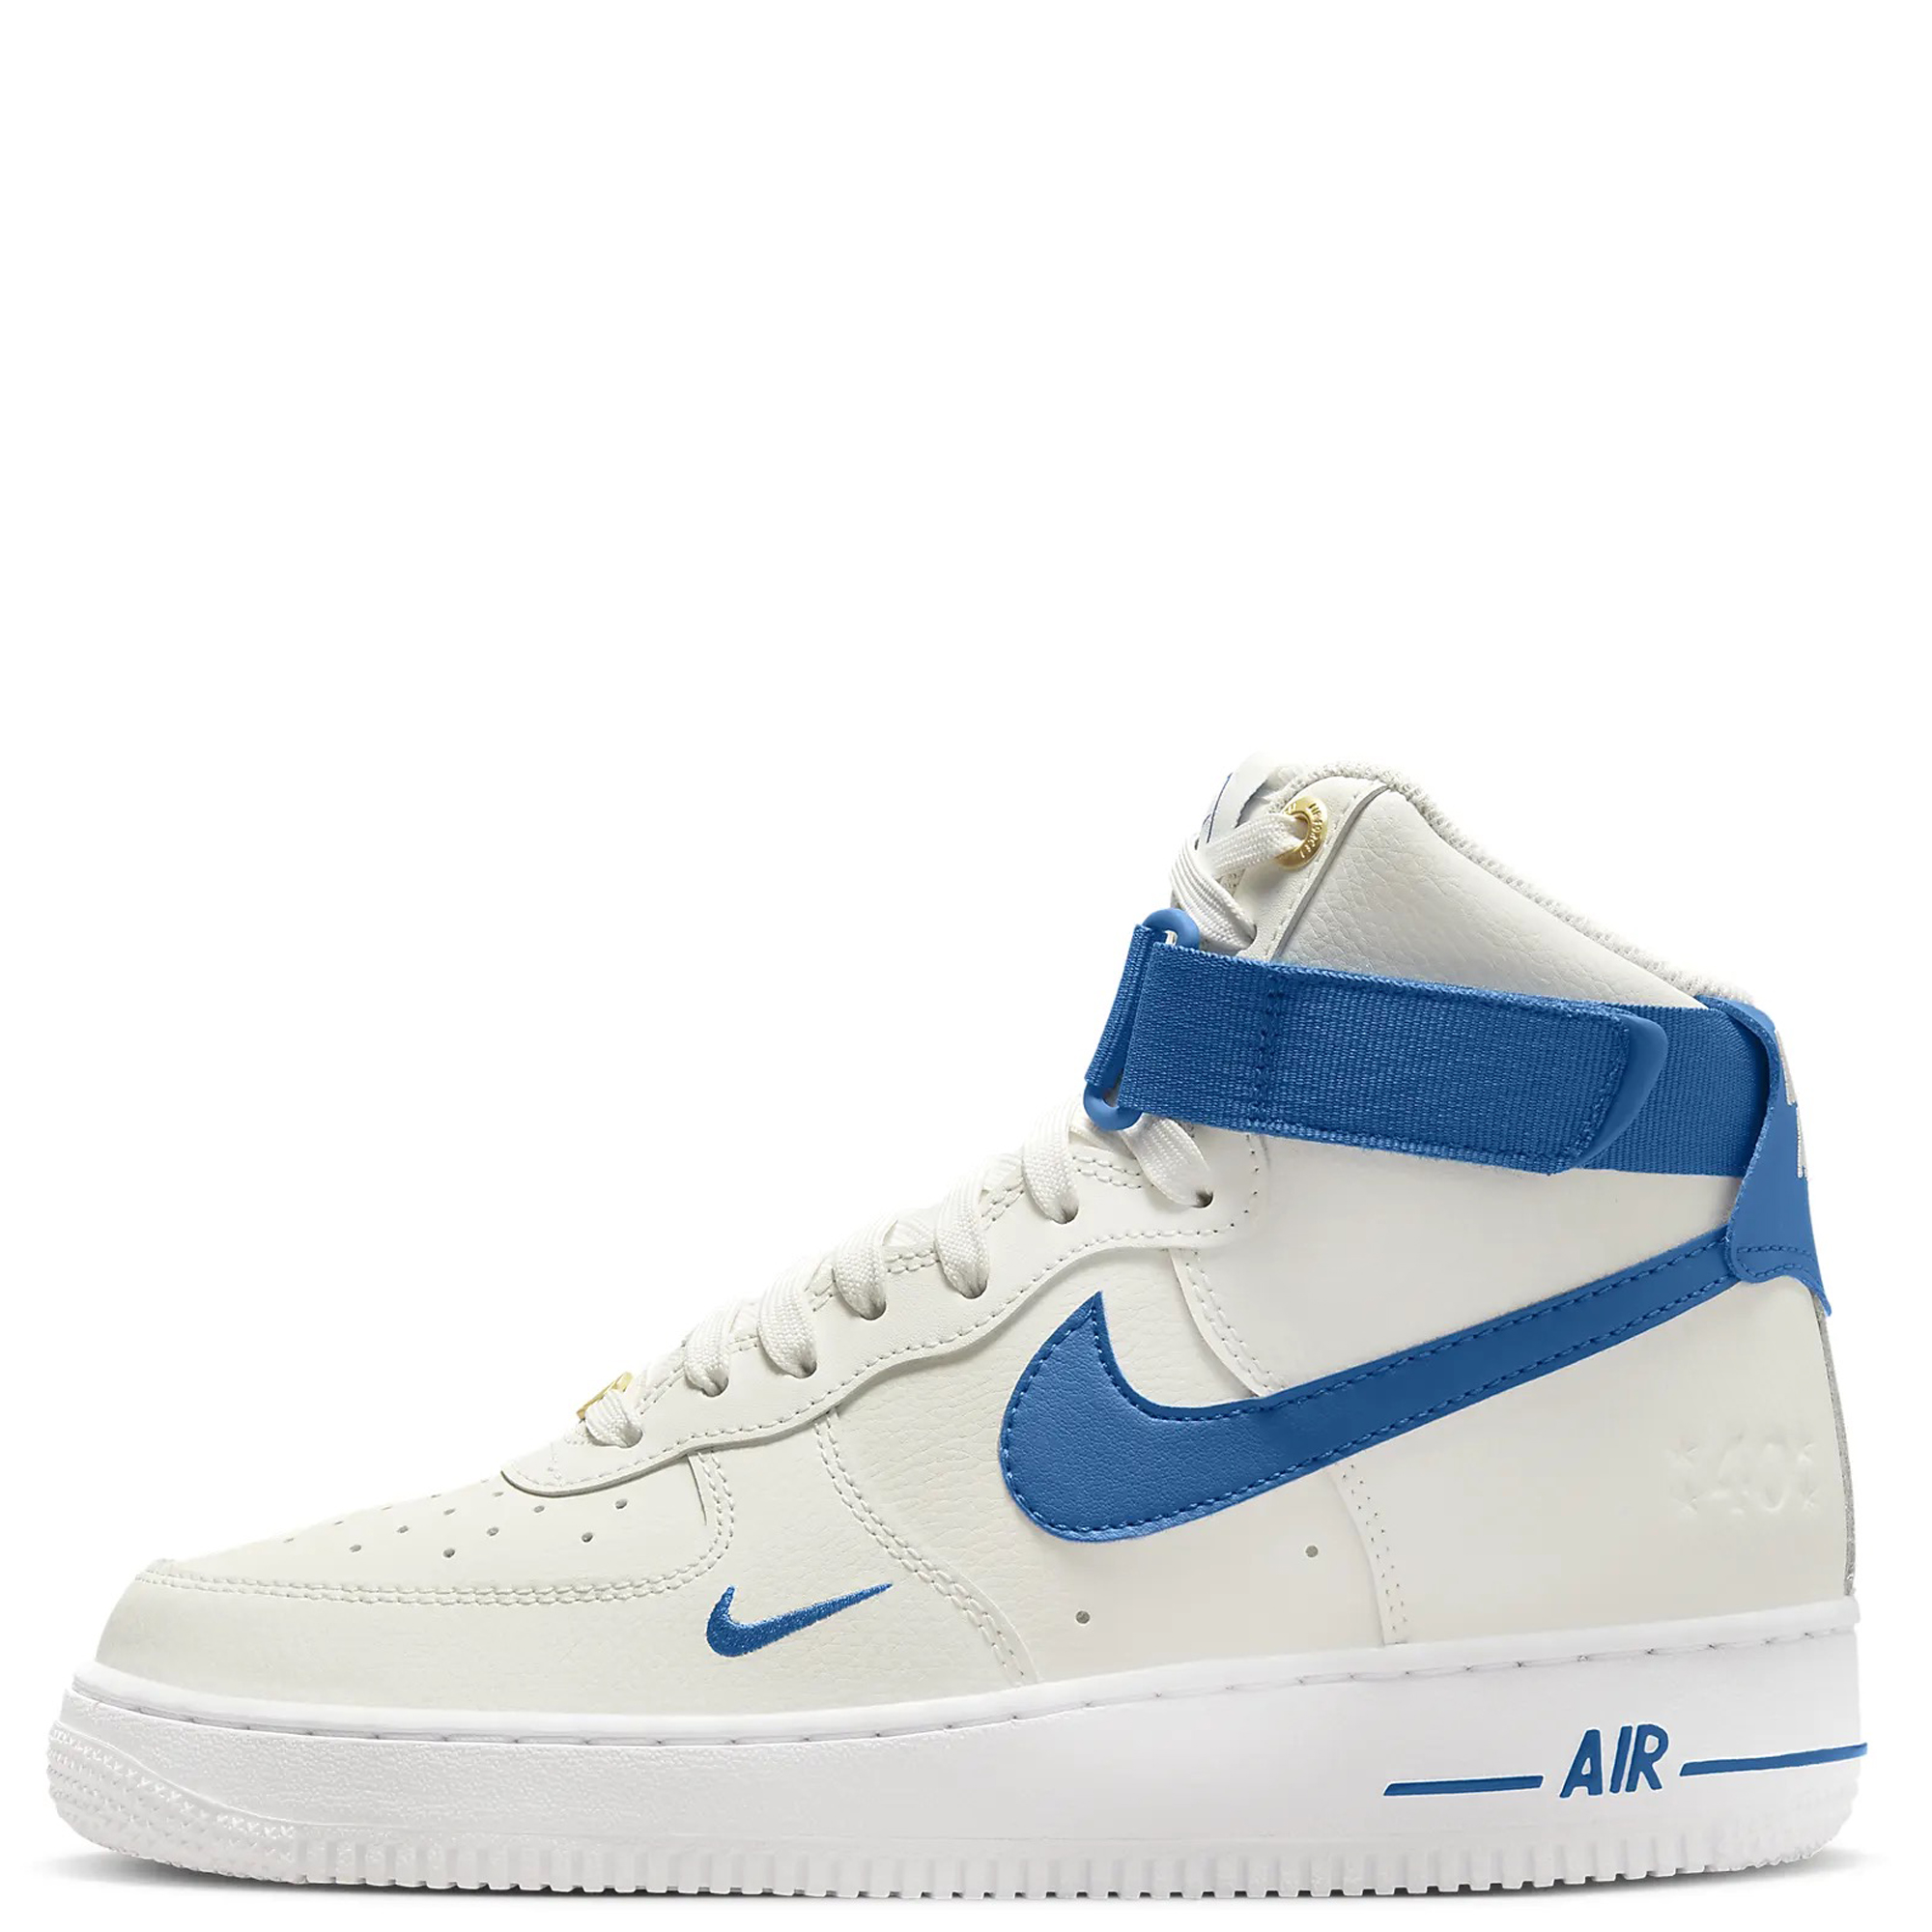 Authentic* Nike Air Force 1 '82 Mid, Men's Fashion, Footwear